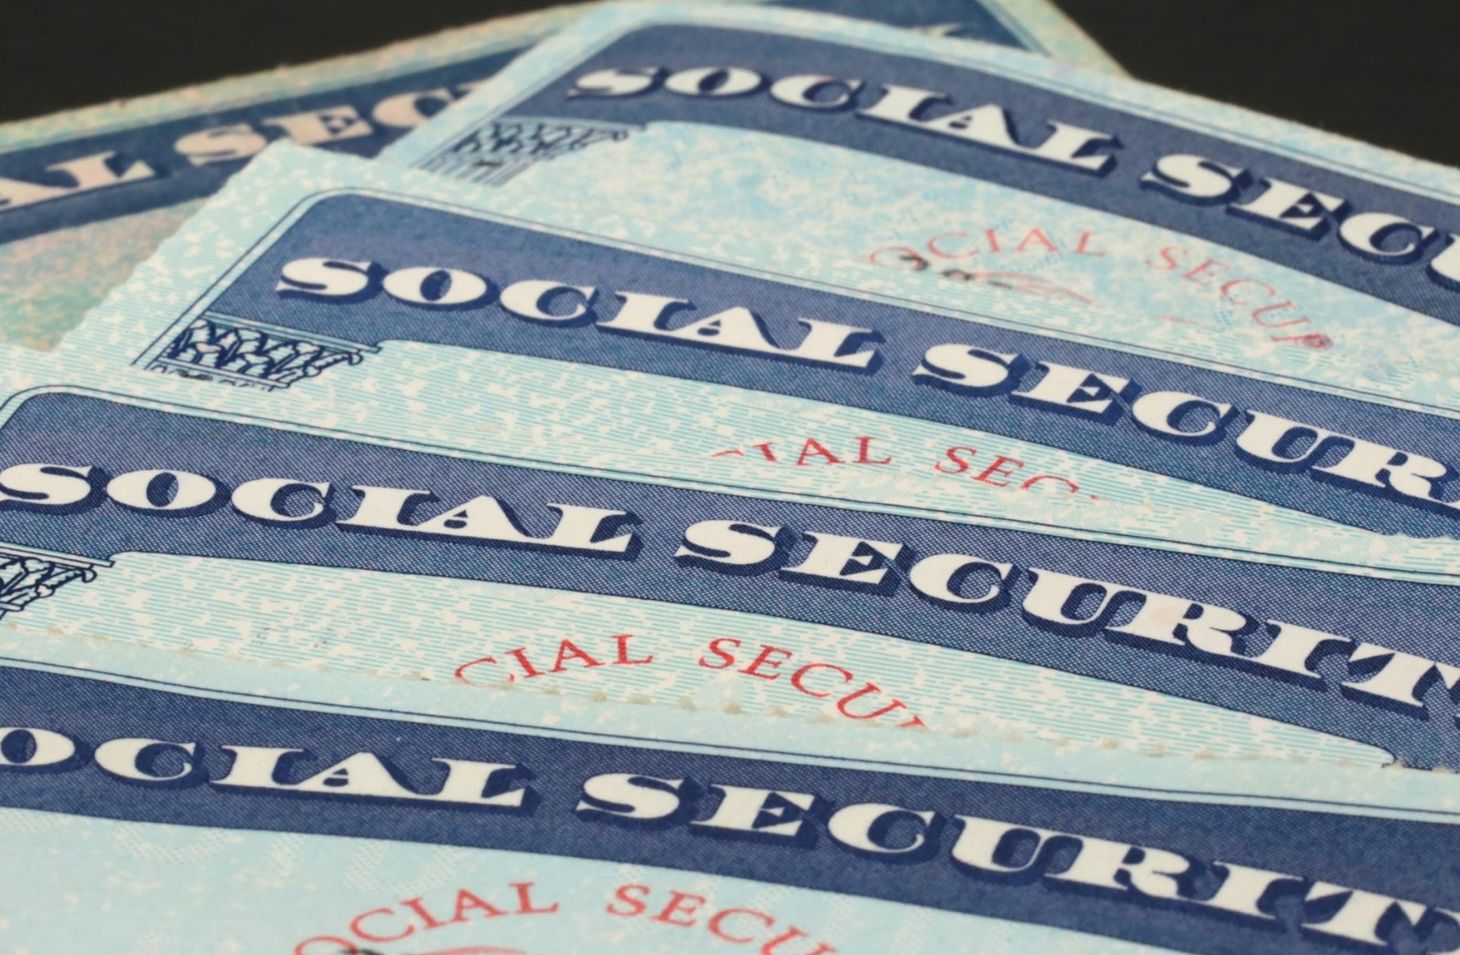 8.7% hike to Social Security checks won't cut it, some fear